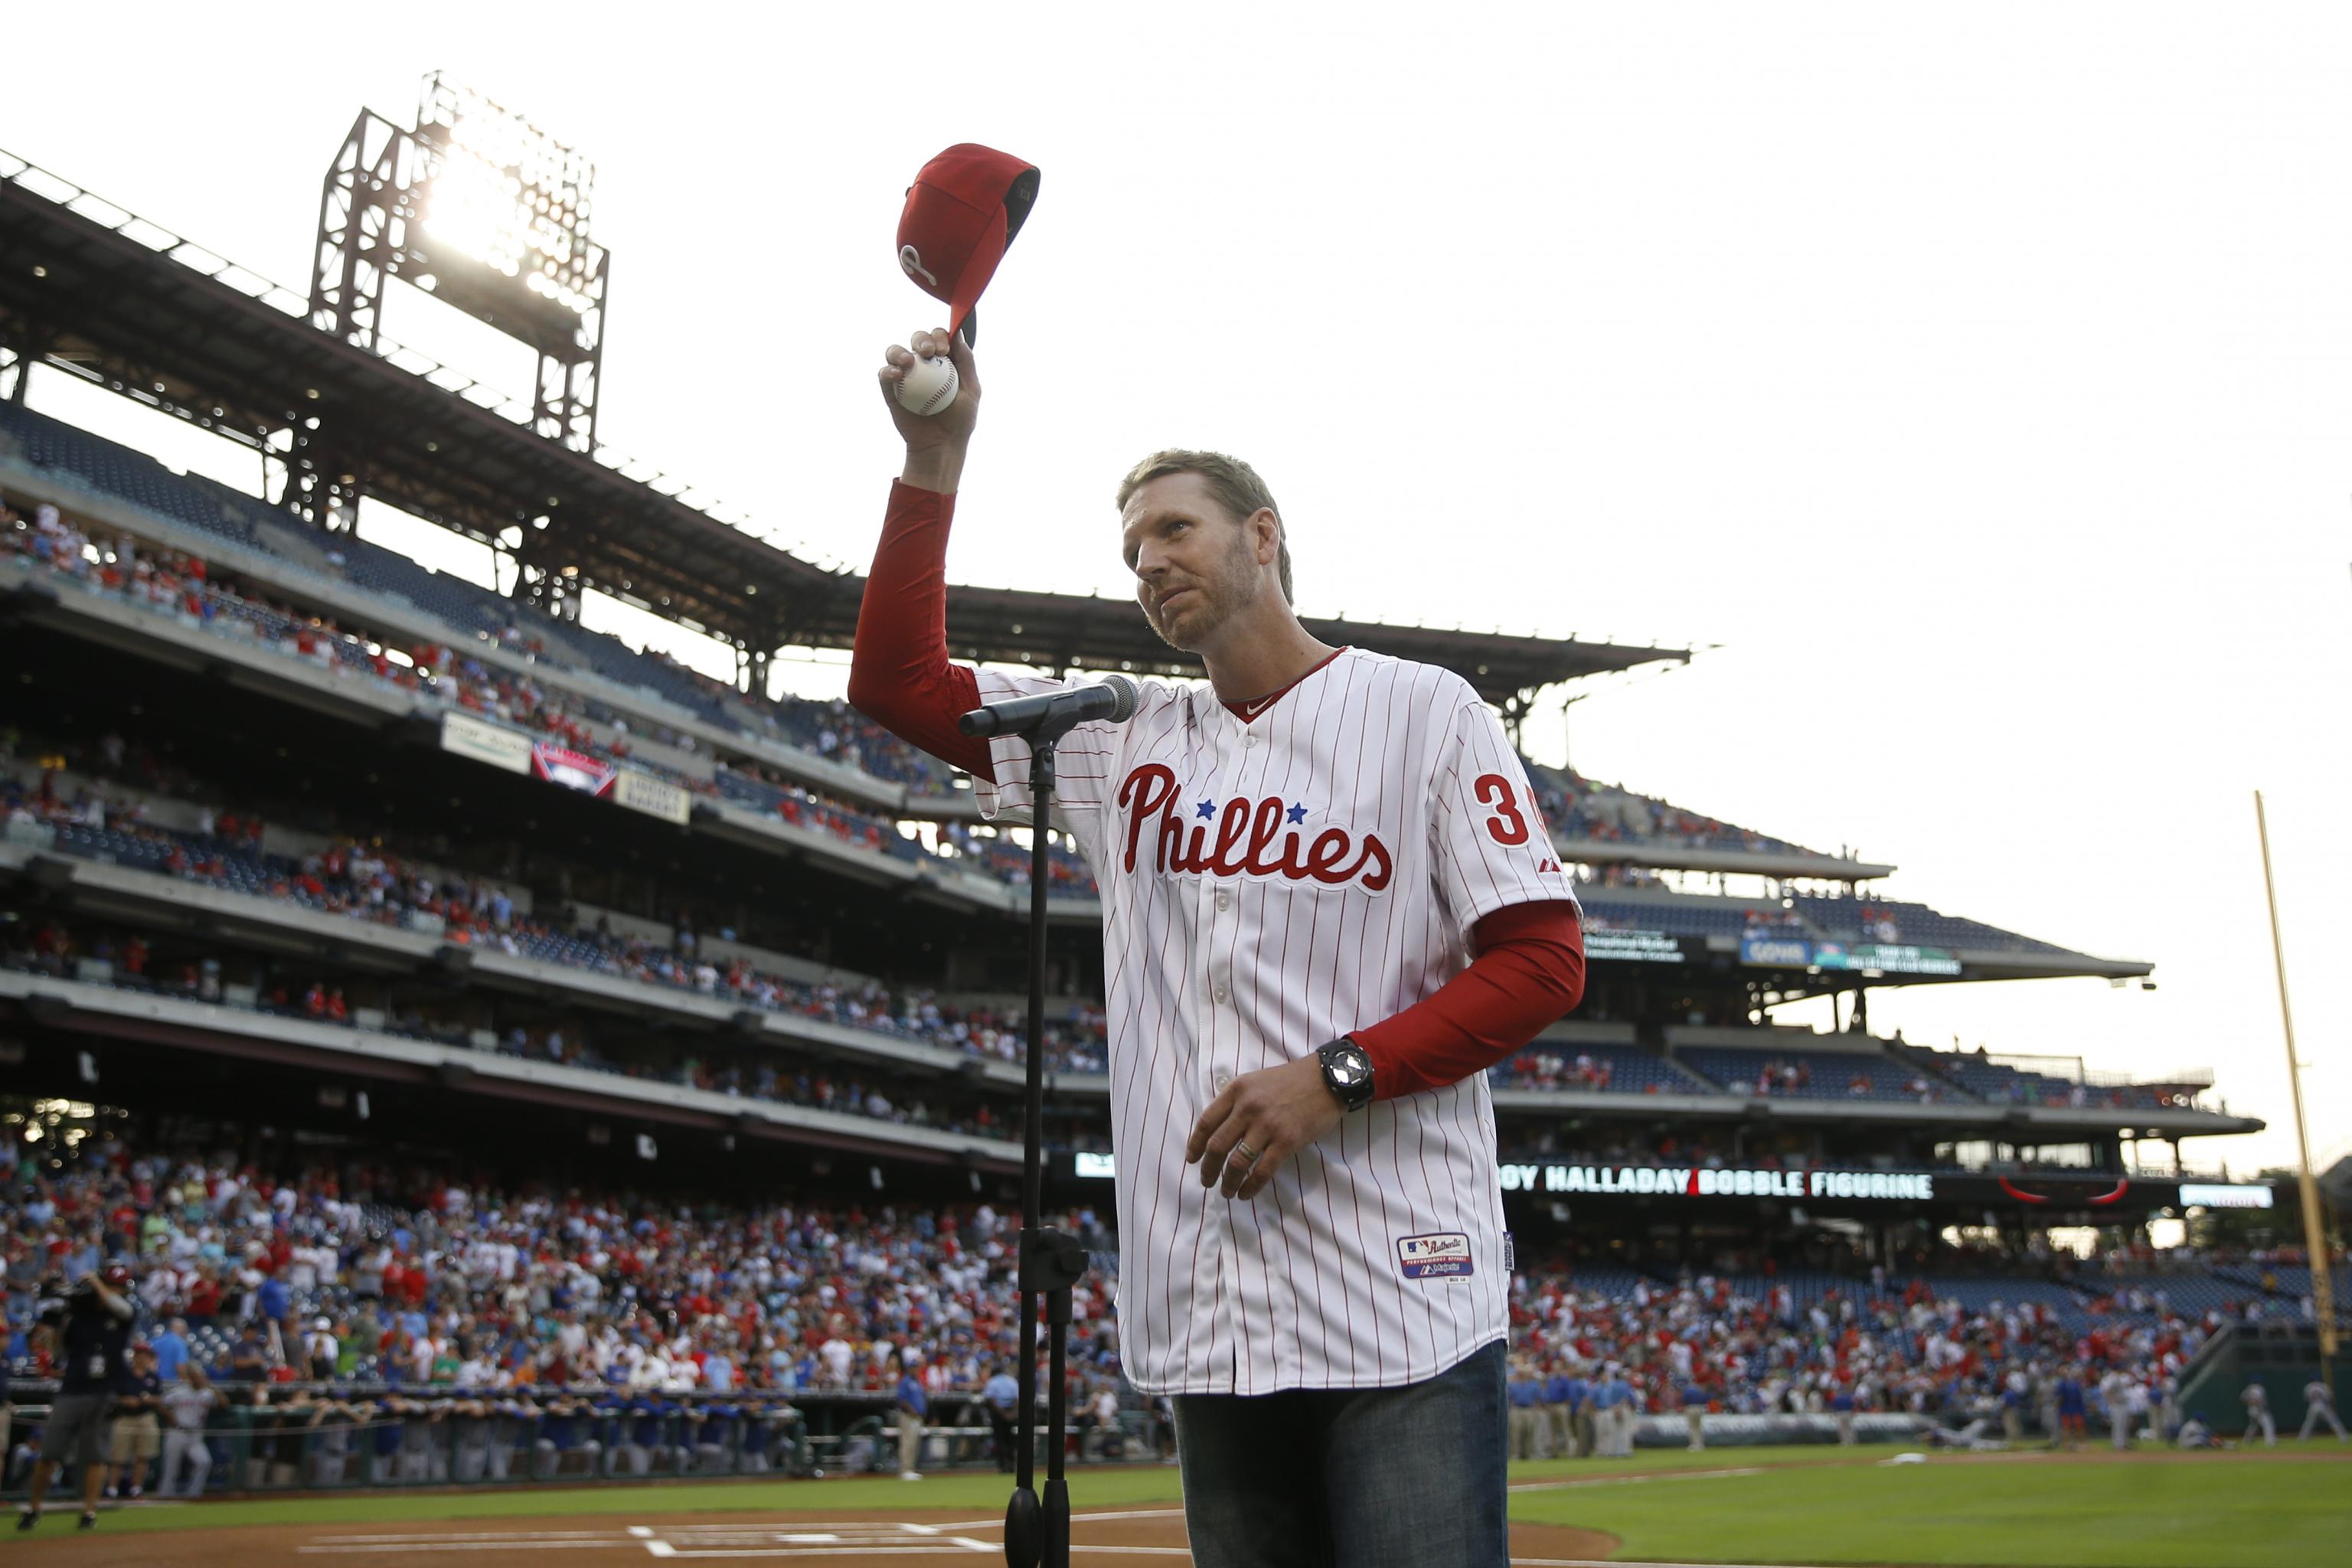 Remembering Roy Halladay's legacy one year after his death